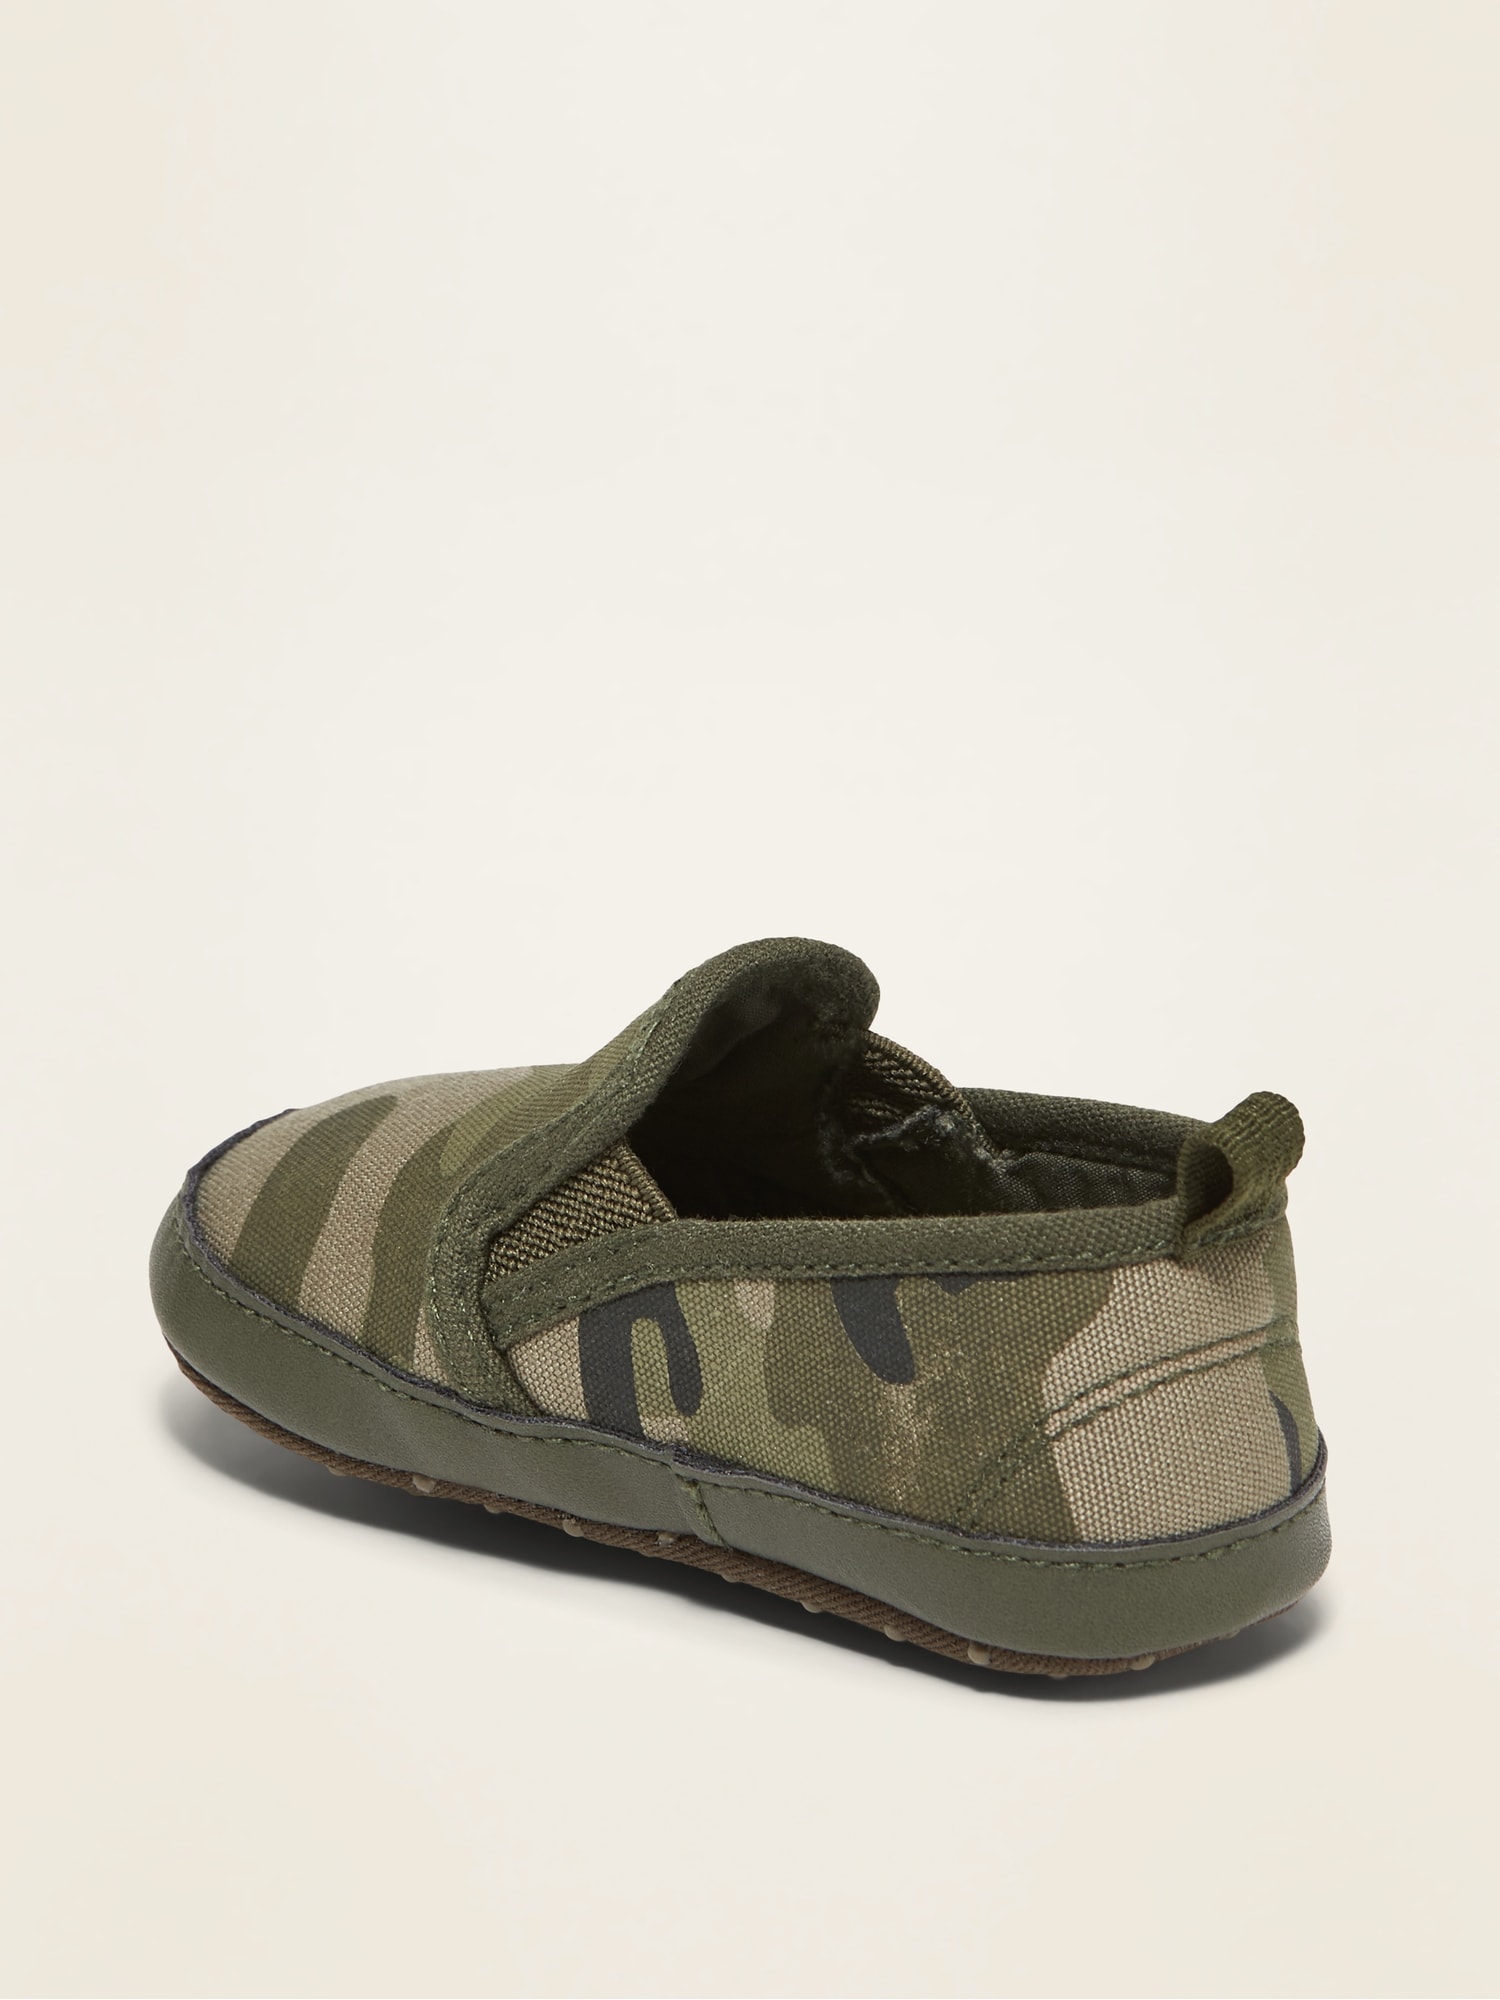 Unisex Camo Canvas Slip-Ons for Baby 